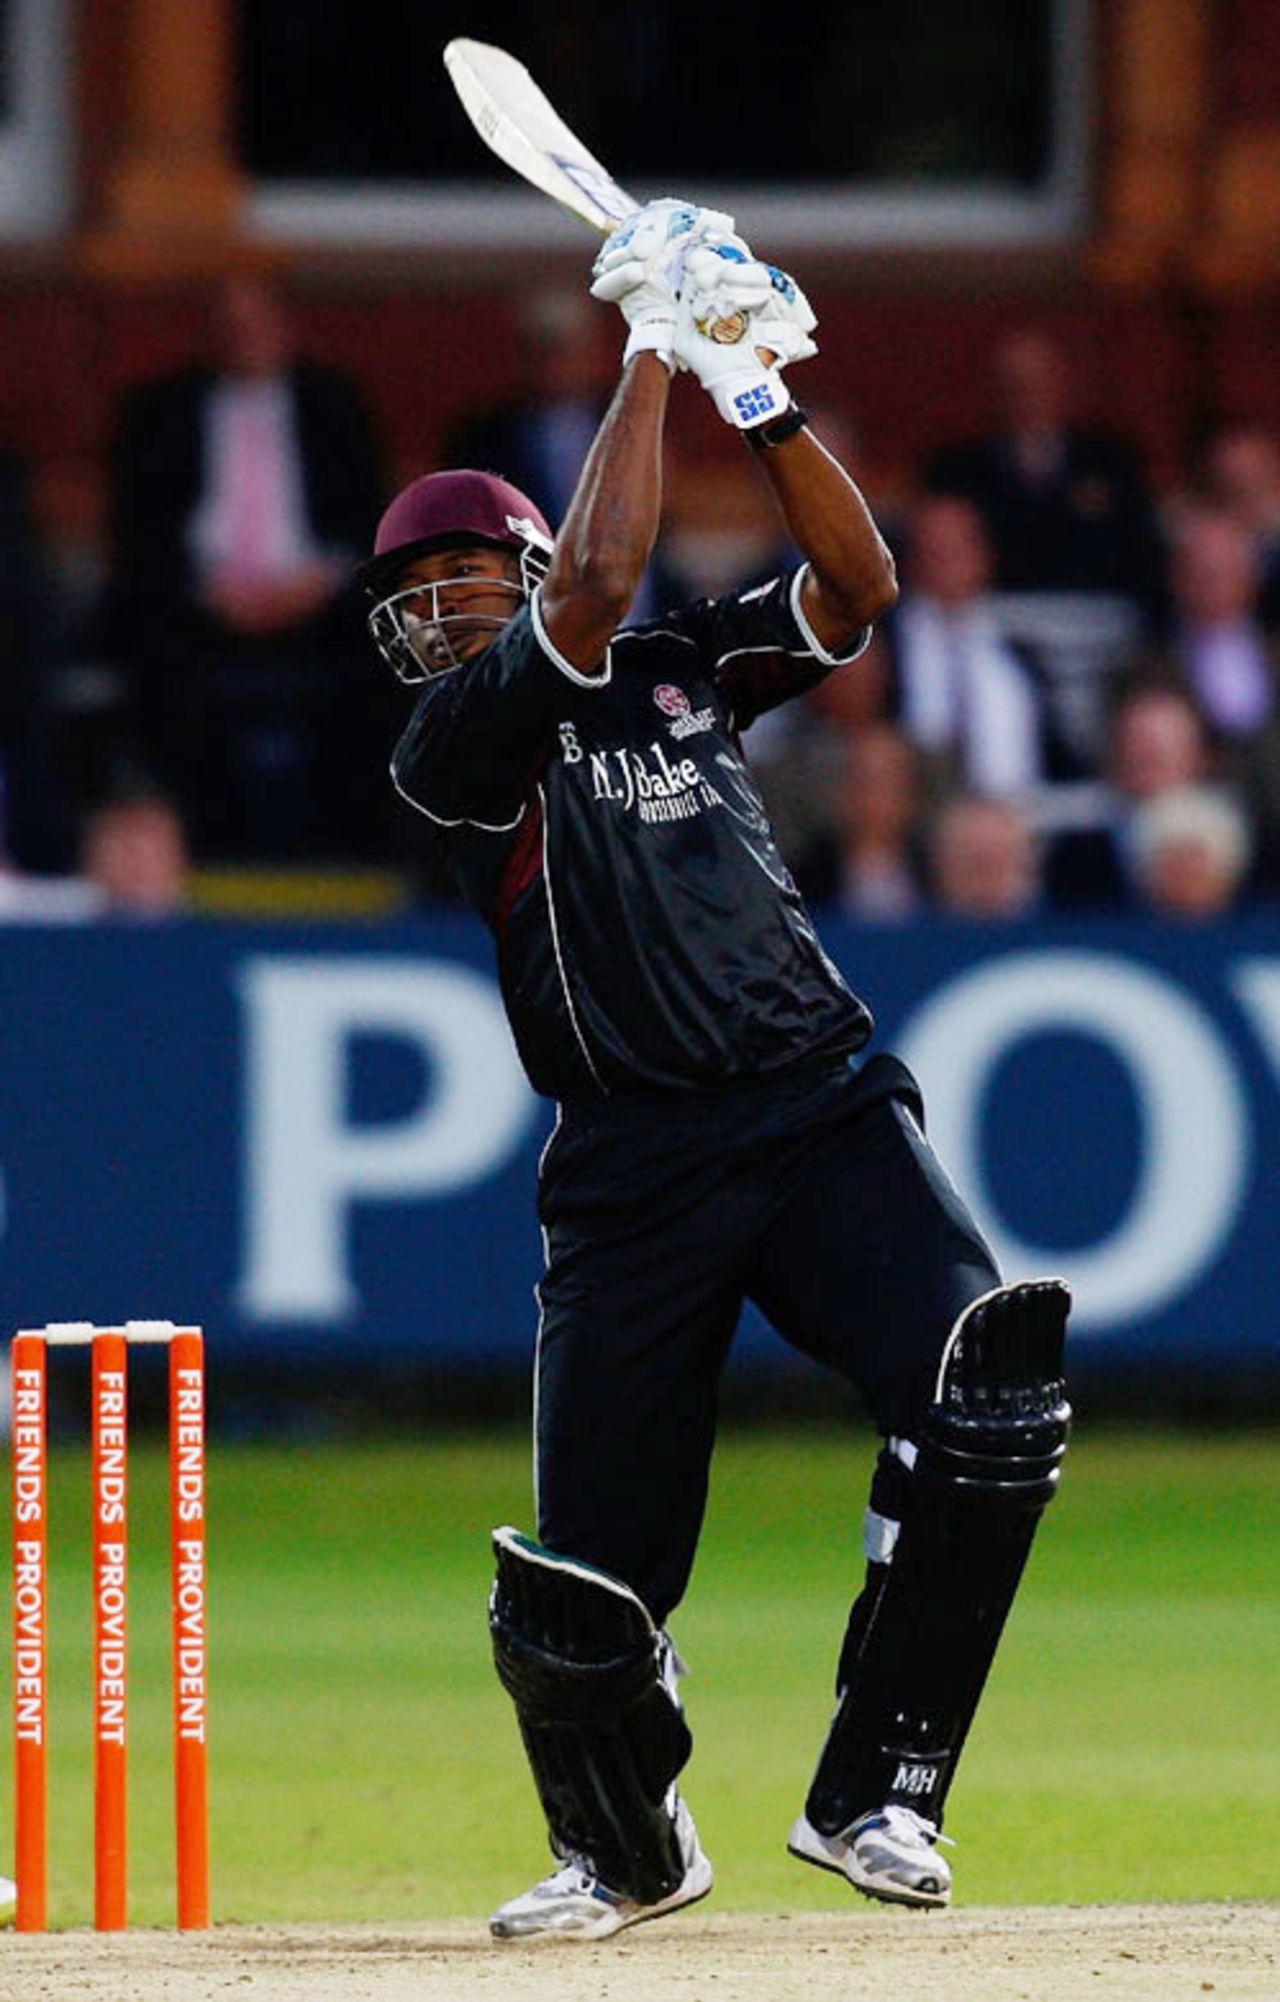 After a slow start, Kieron Pollard single-handedly powered Somerset to a win, Middlesex v Somerset, Friends Provident t20, Lord's, June 9, 2010